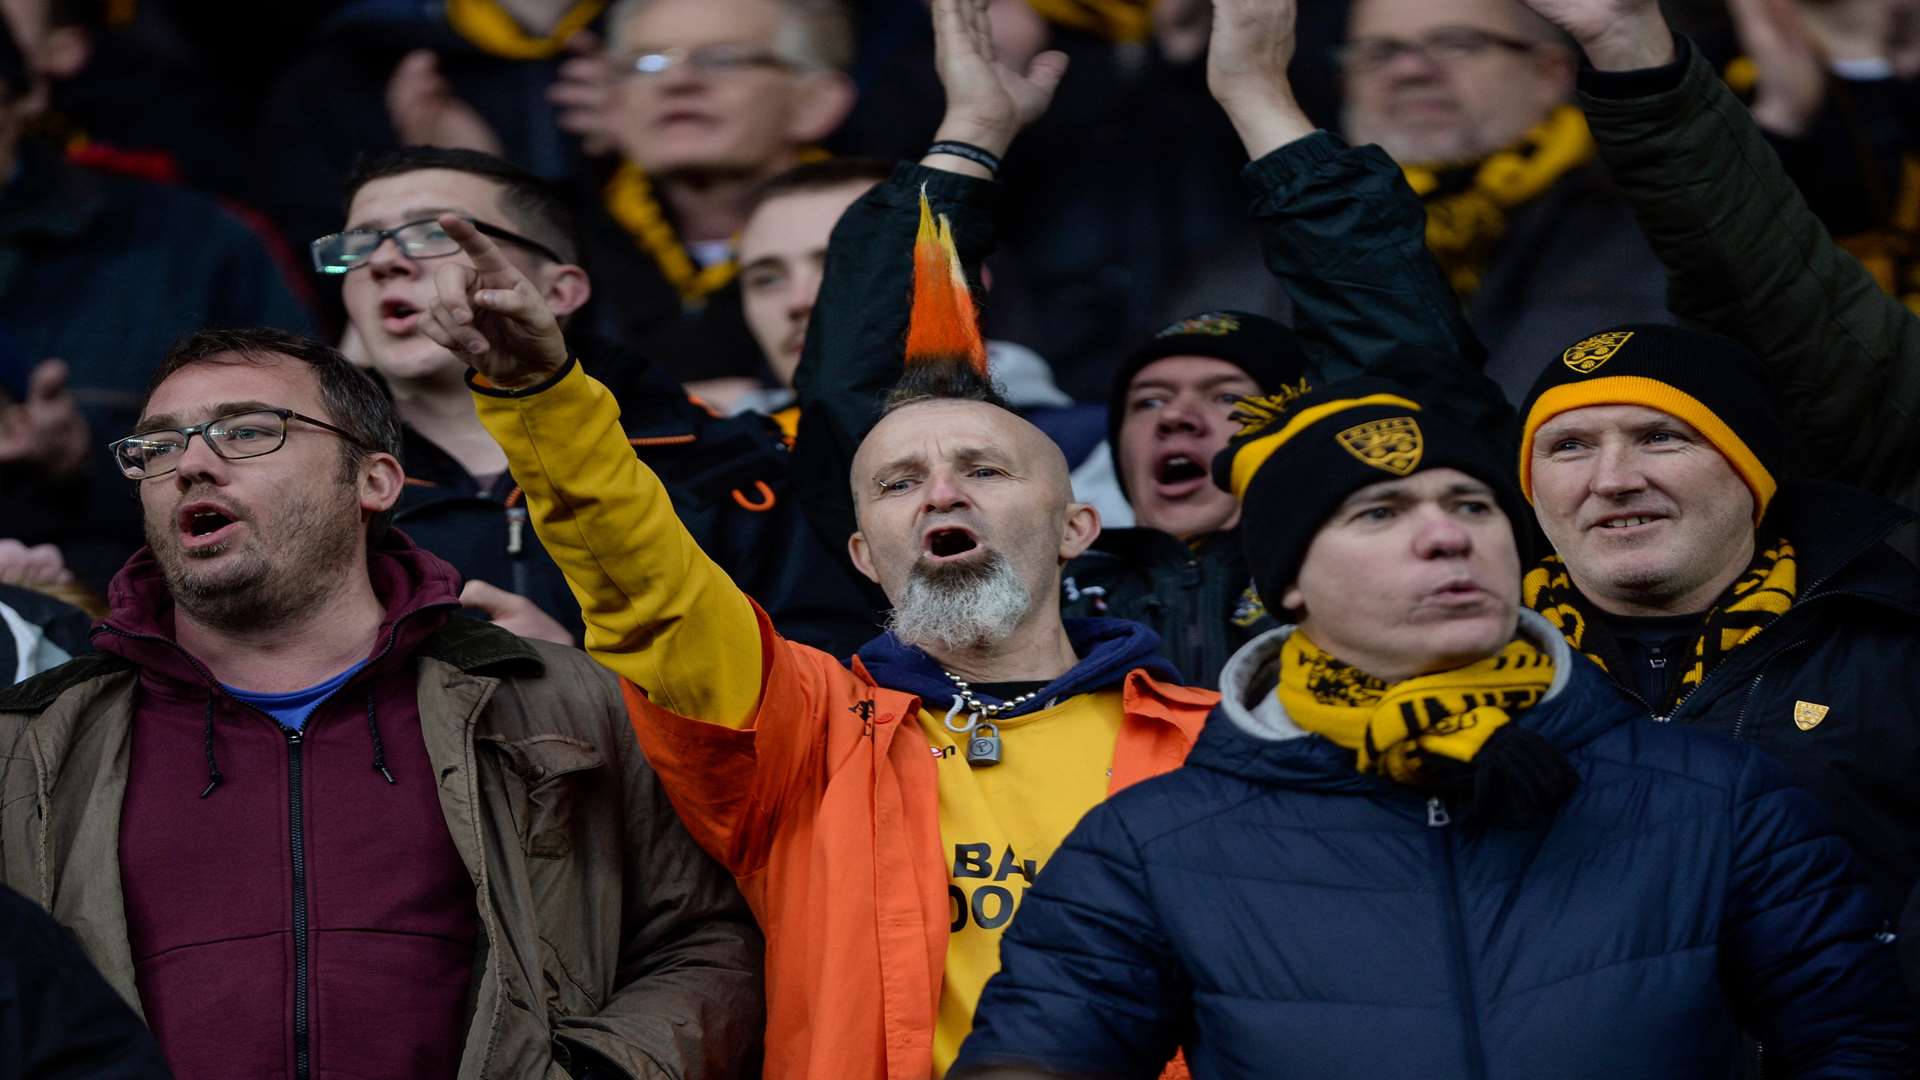 Maidstone fans get behind their team at MK Dons. Picture: Ady Kerry